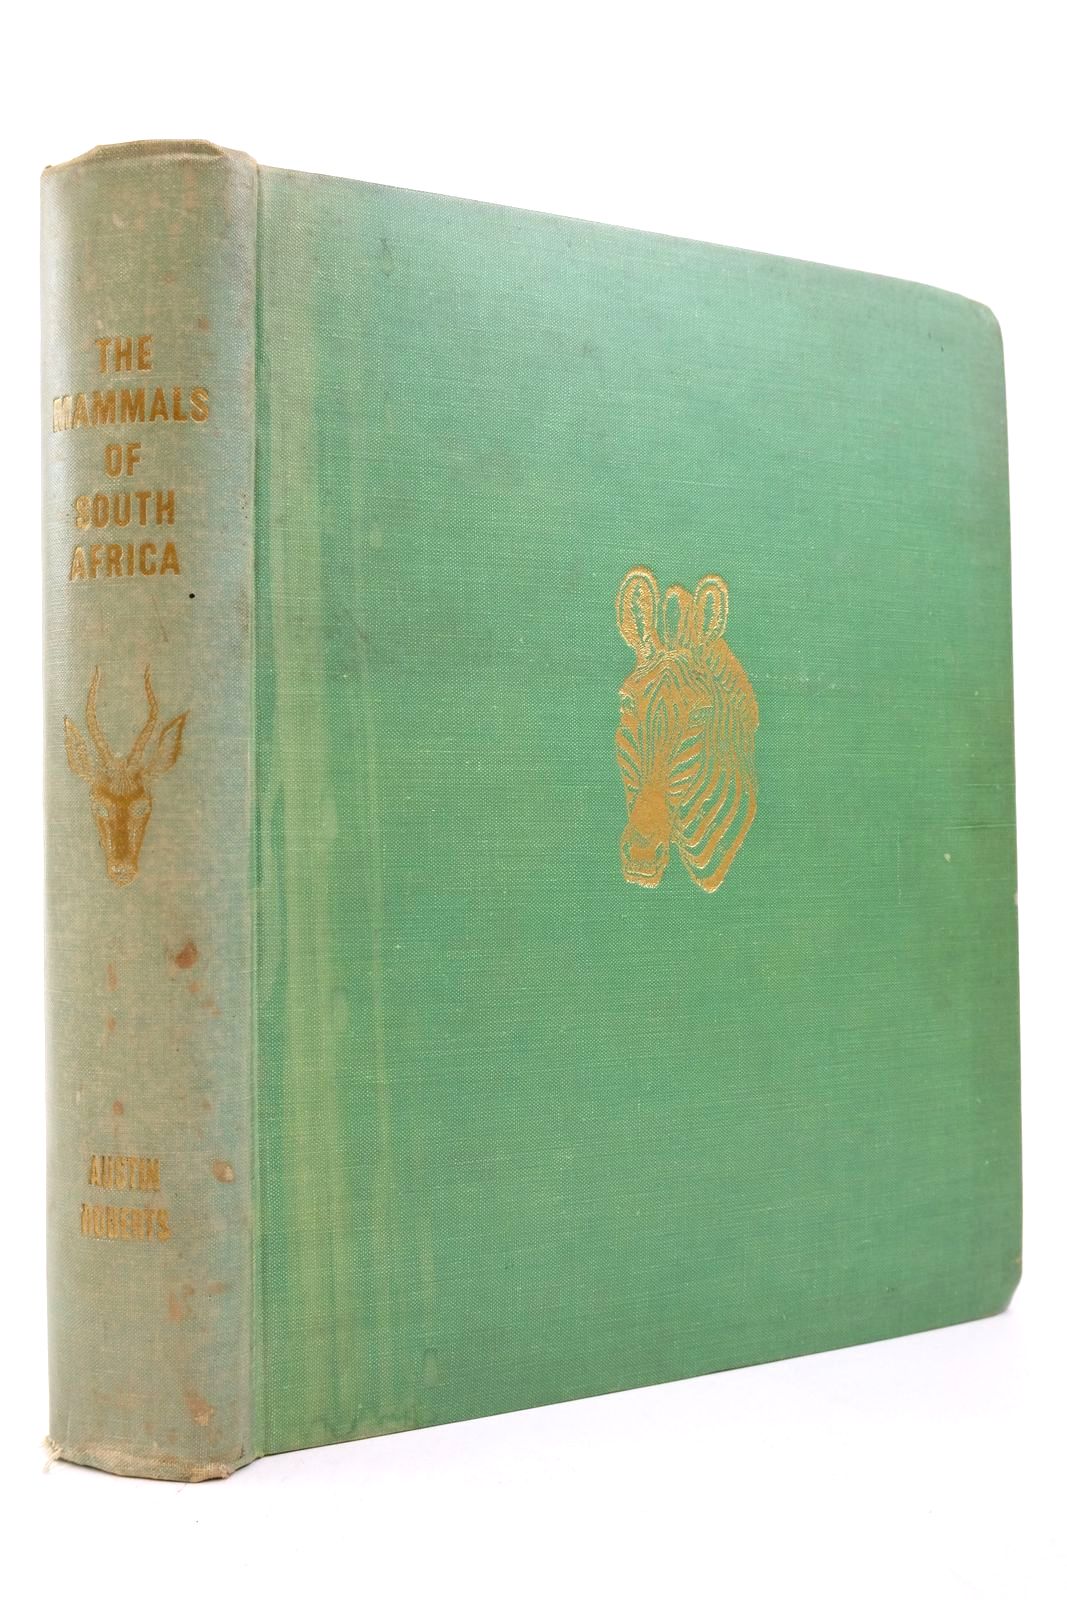 Photo of THE MAMMALS OF SOUTH AFRICA written by Roberts, Austin illustrated by Smit, P.J. published by Central News Agency (STOCK CODE: 2139188)  for sale by Stella & Rose's Books